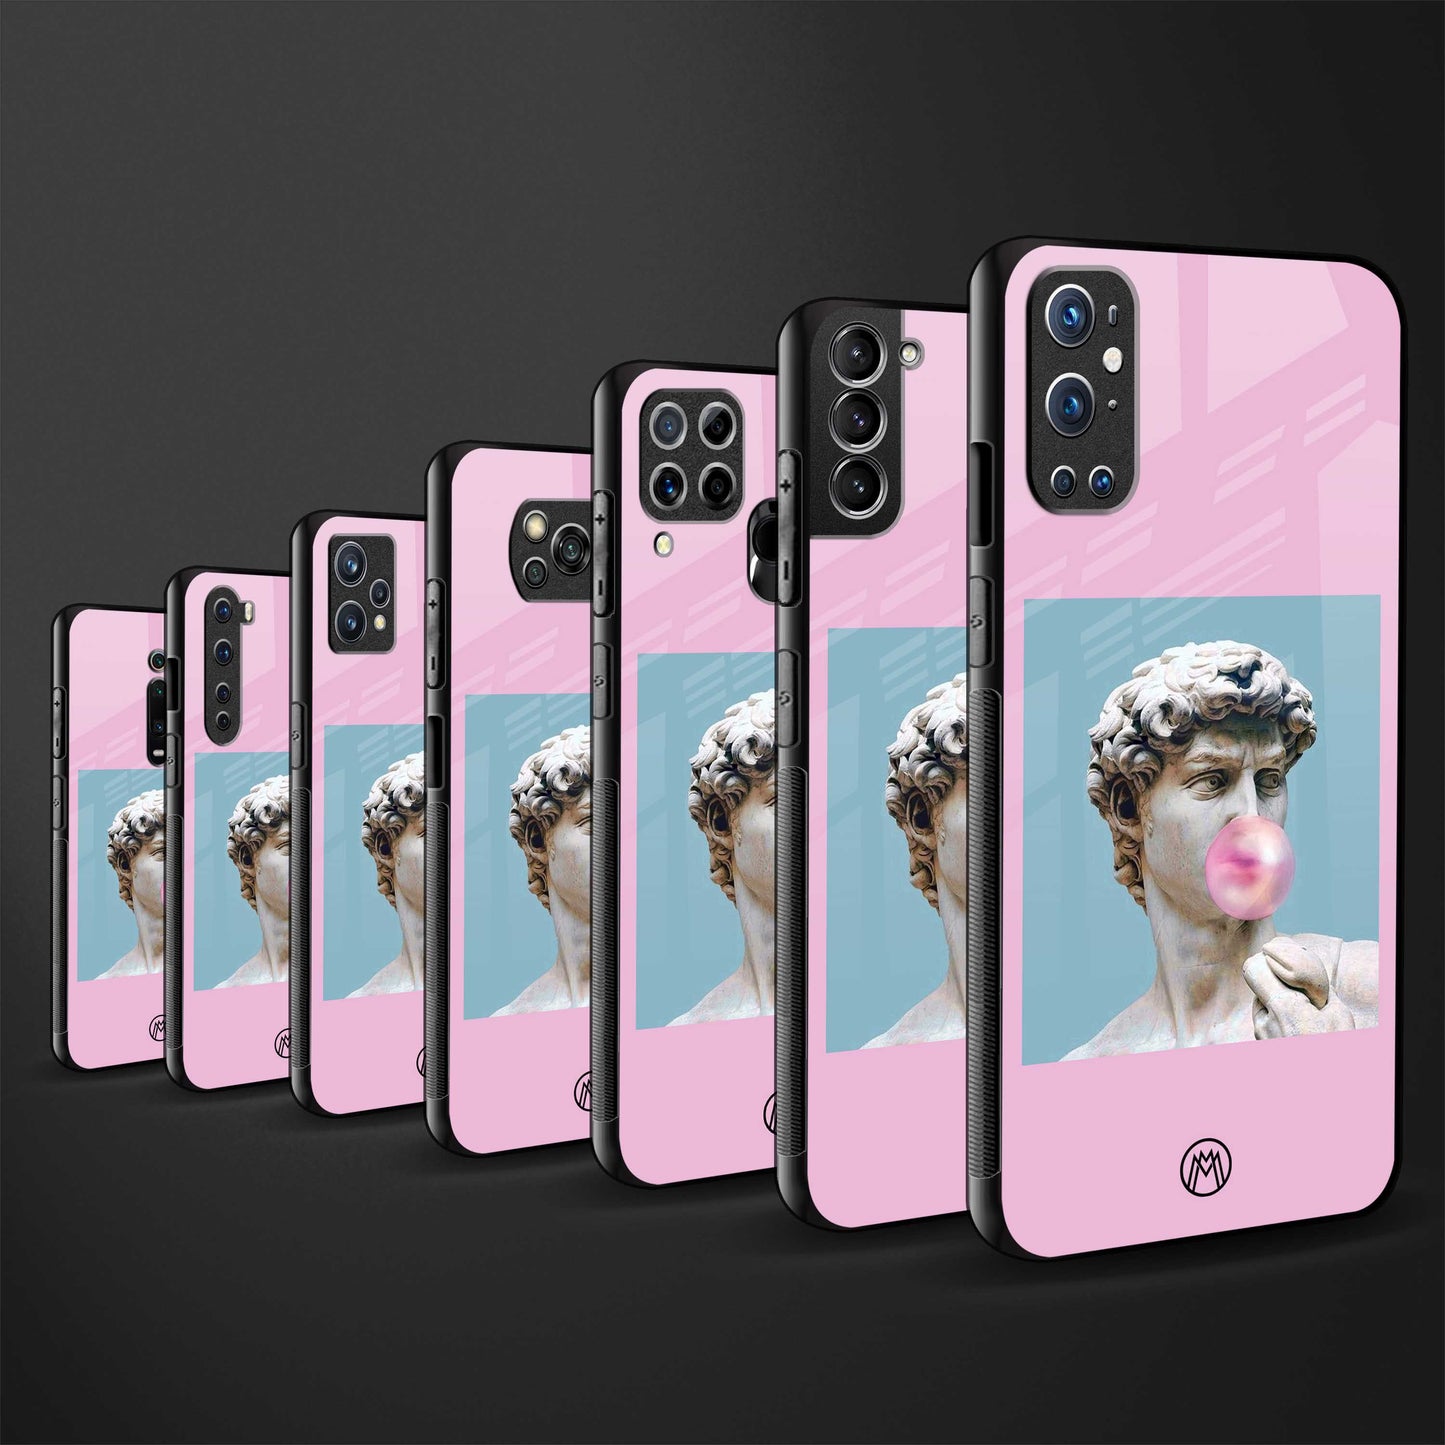 dope david michelangelo back phone cover | glass case for samsung galaxy a23